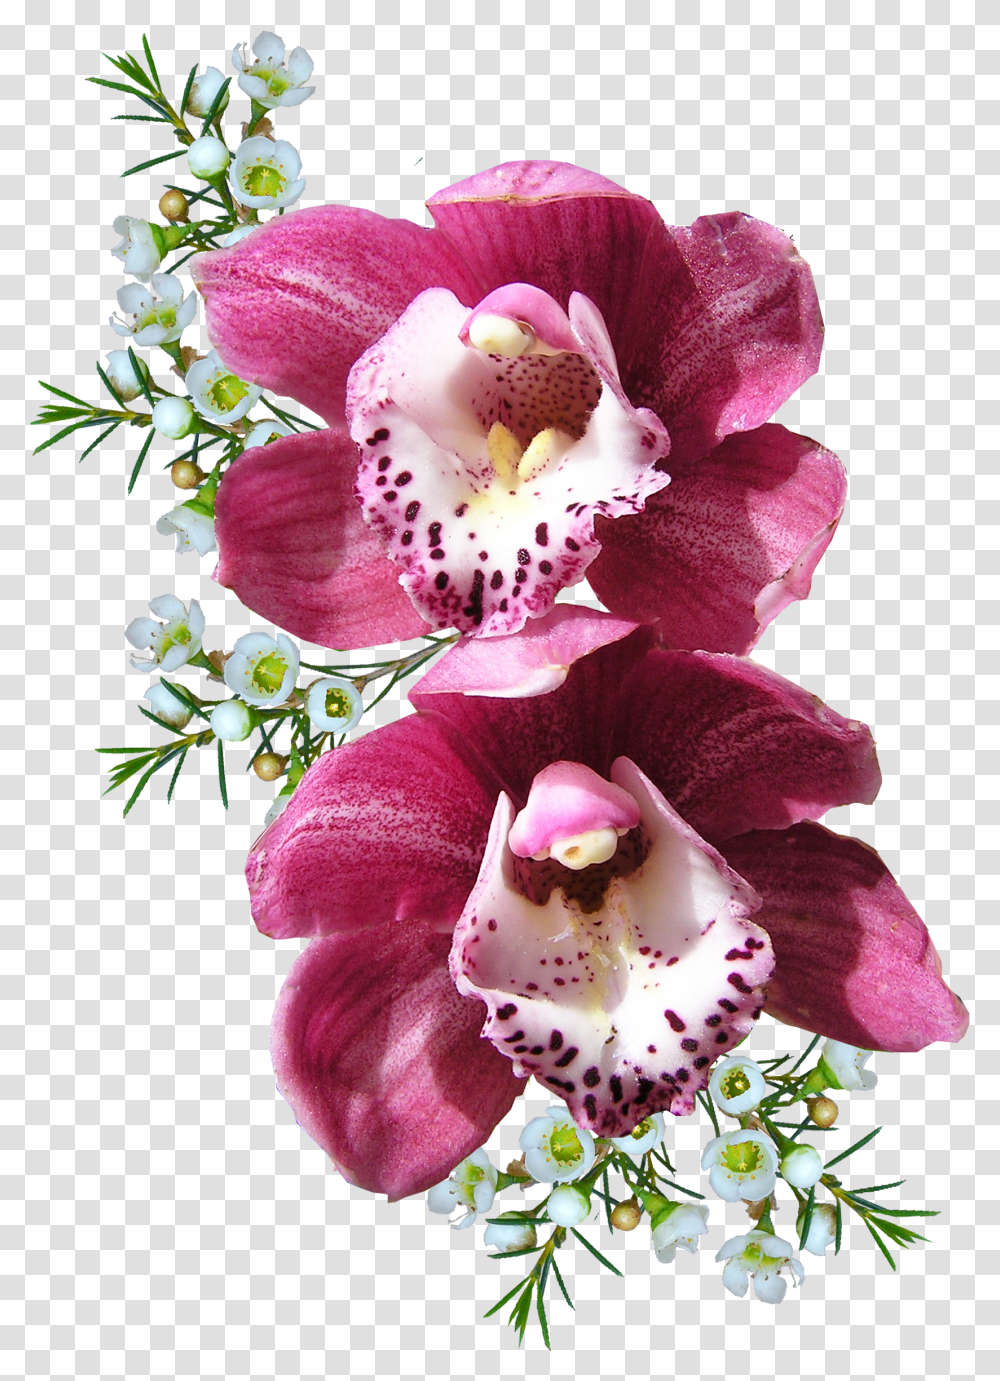 Download Orchid Flower Image For Free Flowers Transparent Png